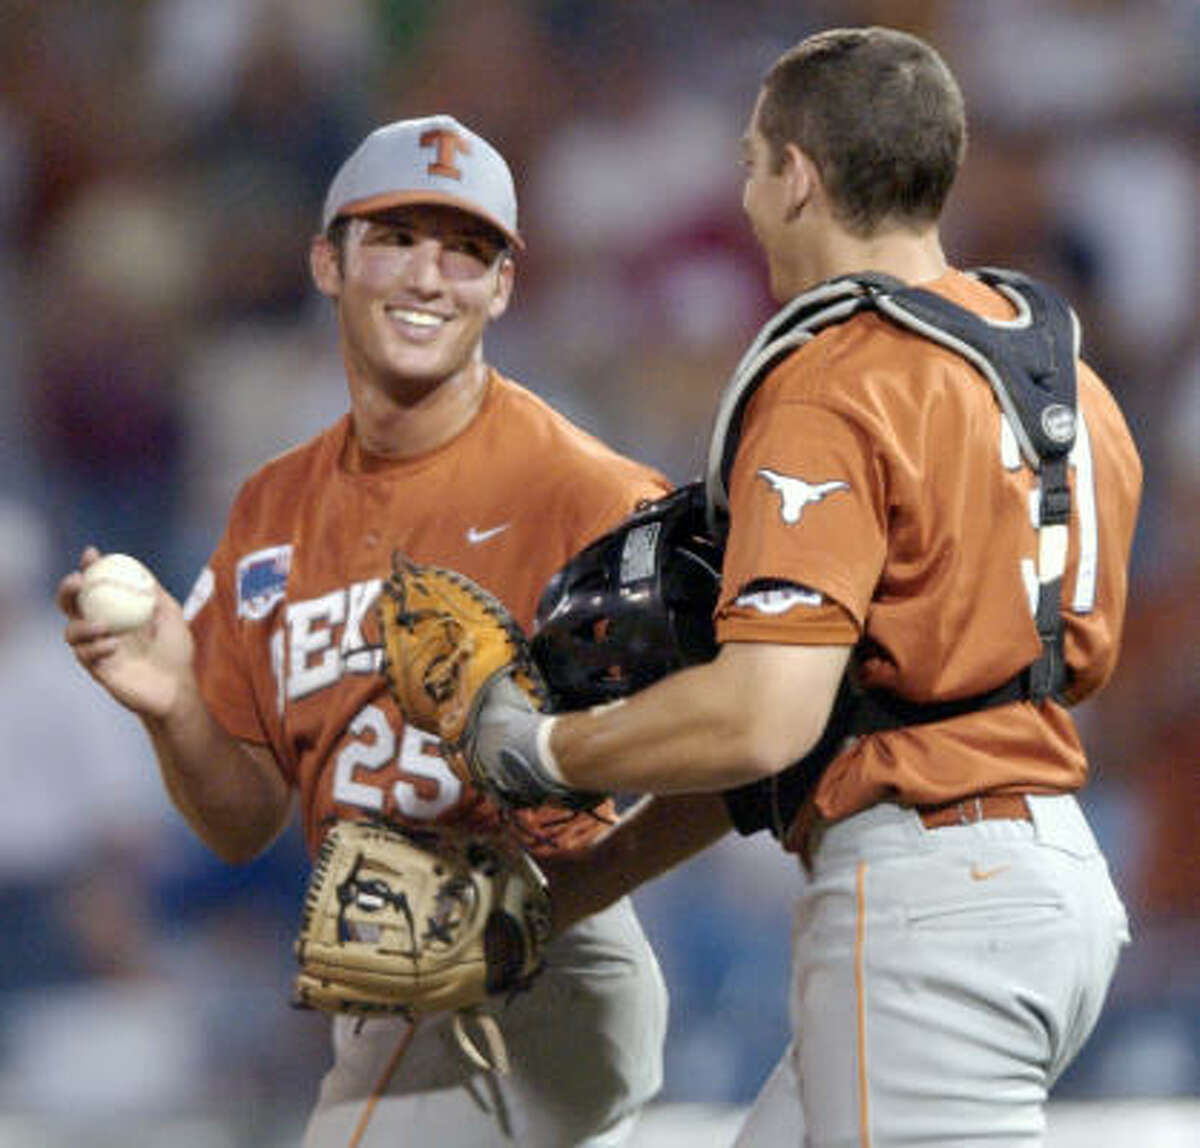 Huston Street Texas Street, left, earned CWS most outstanding player honors in 2002, culminating a season in which he earned four saves in four games in Omaha, a CWS record, in leading the Longhorns to the title. Street, one of the college game’s all-time nice guys and son of one-time UT quarterback James Street, was drafted by Oakland in 2004 and within a year was pitching in the majors.